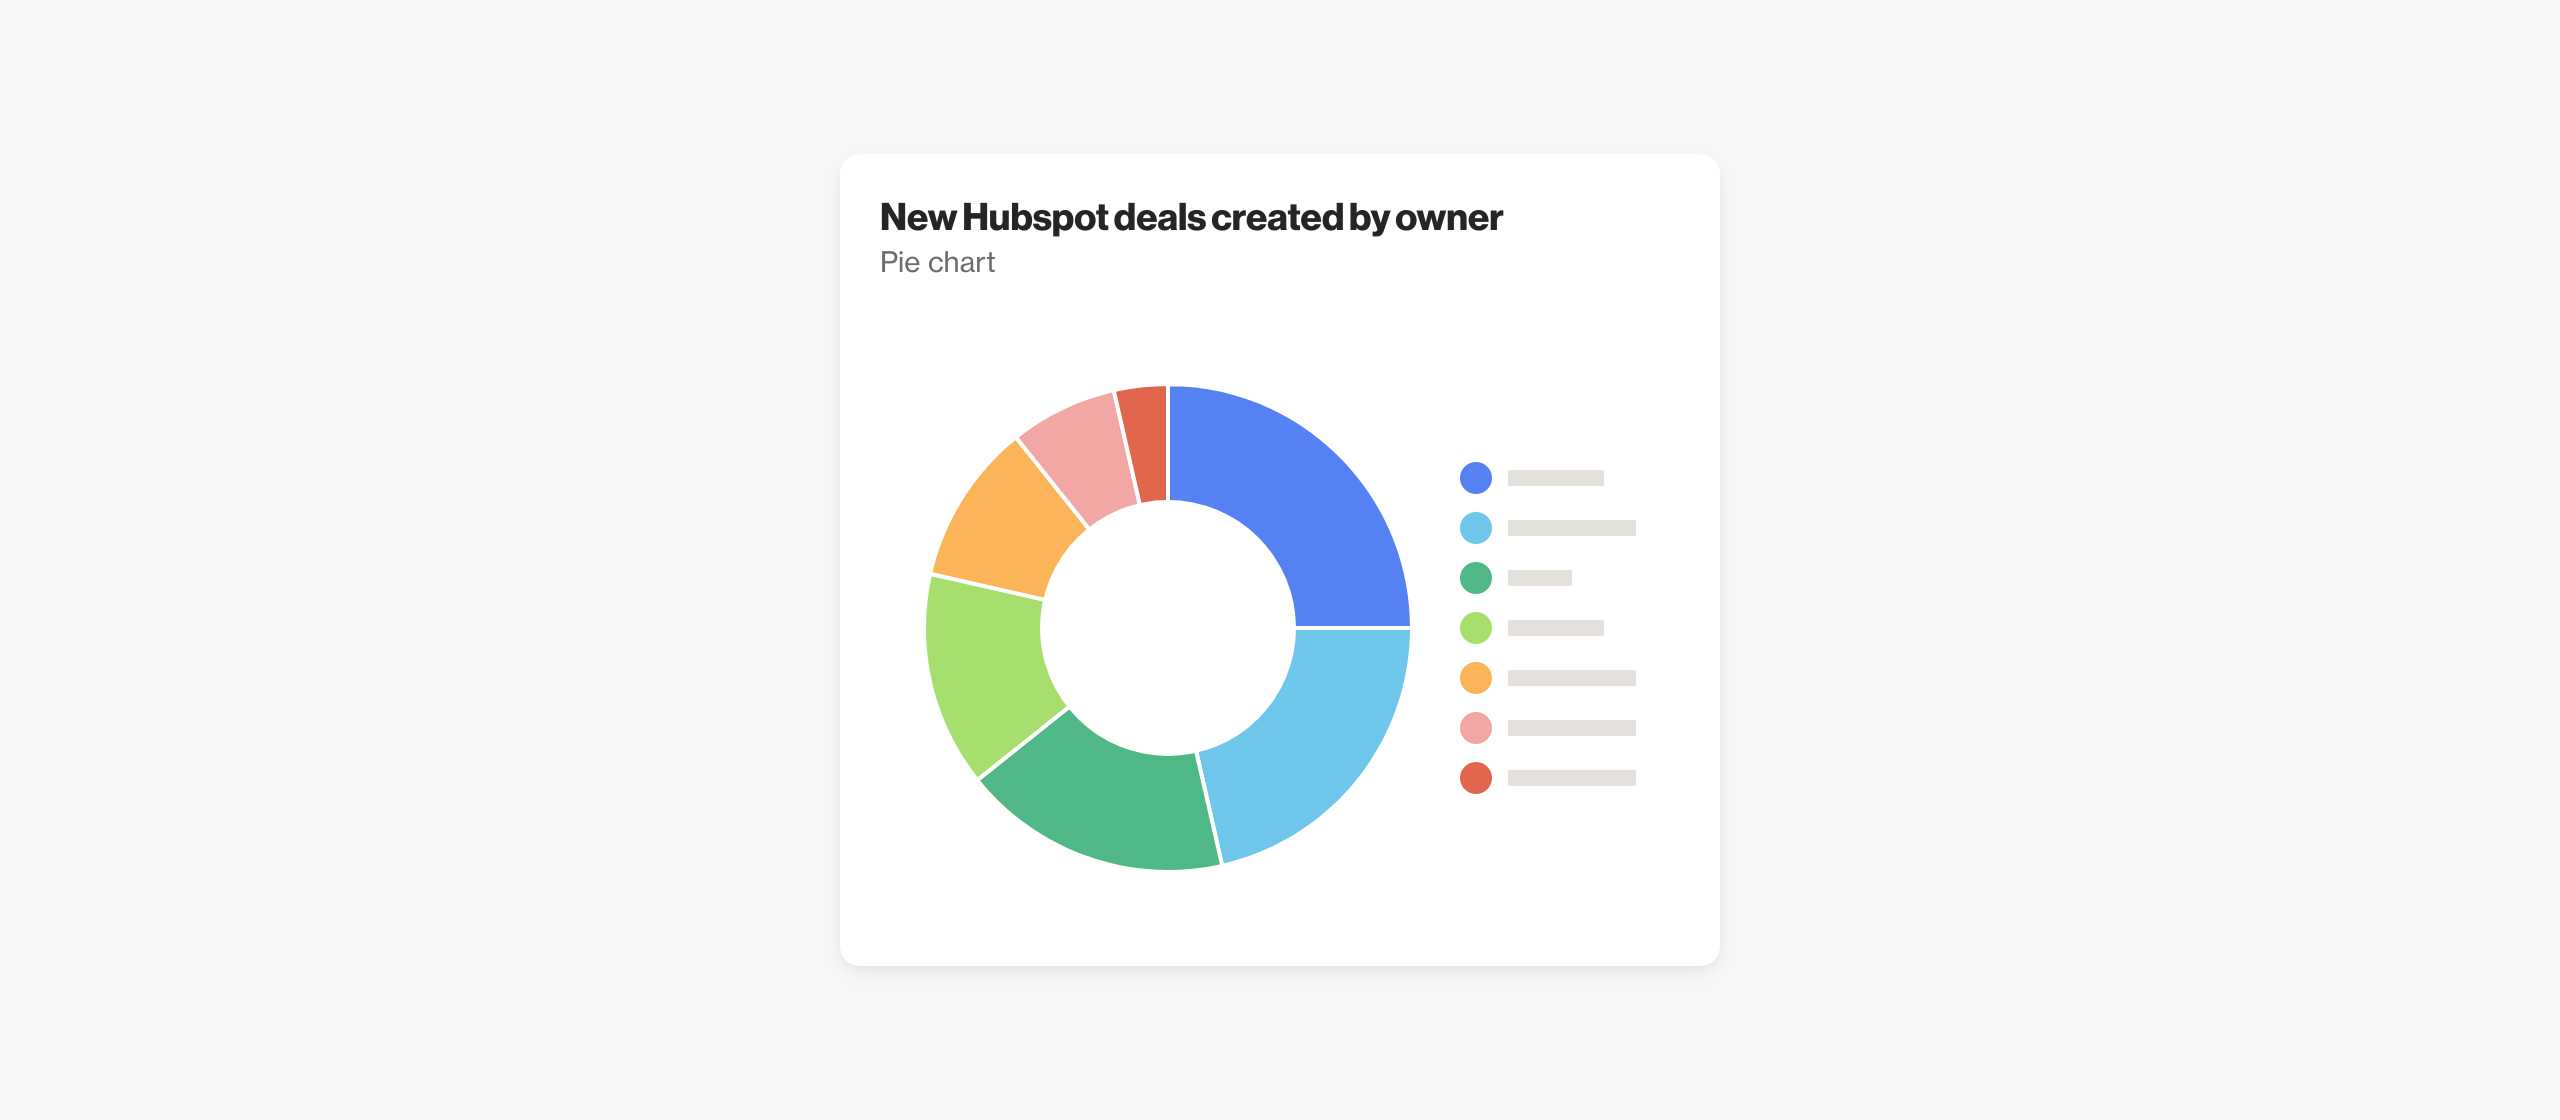 New Hubspot deals created by owner